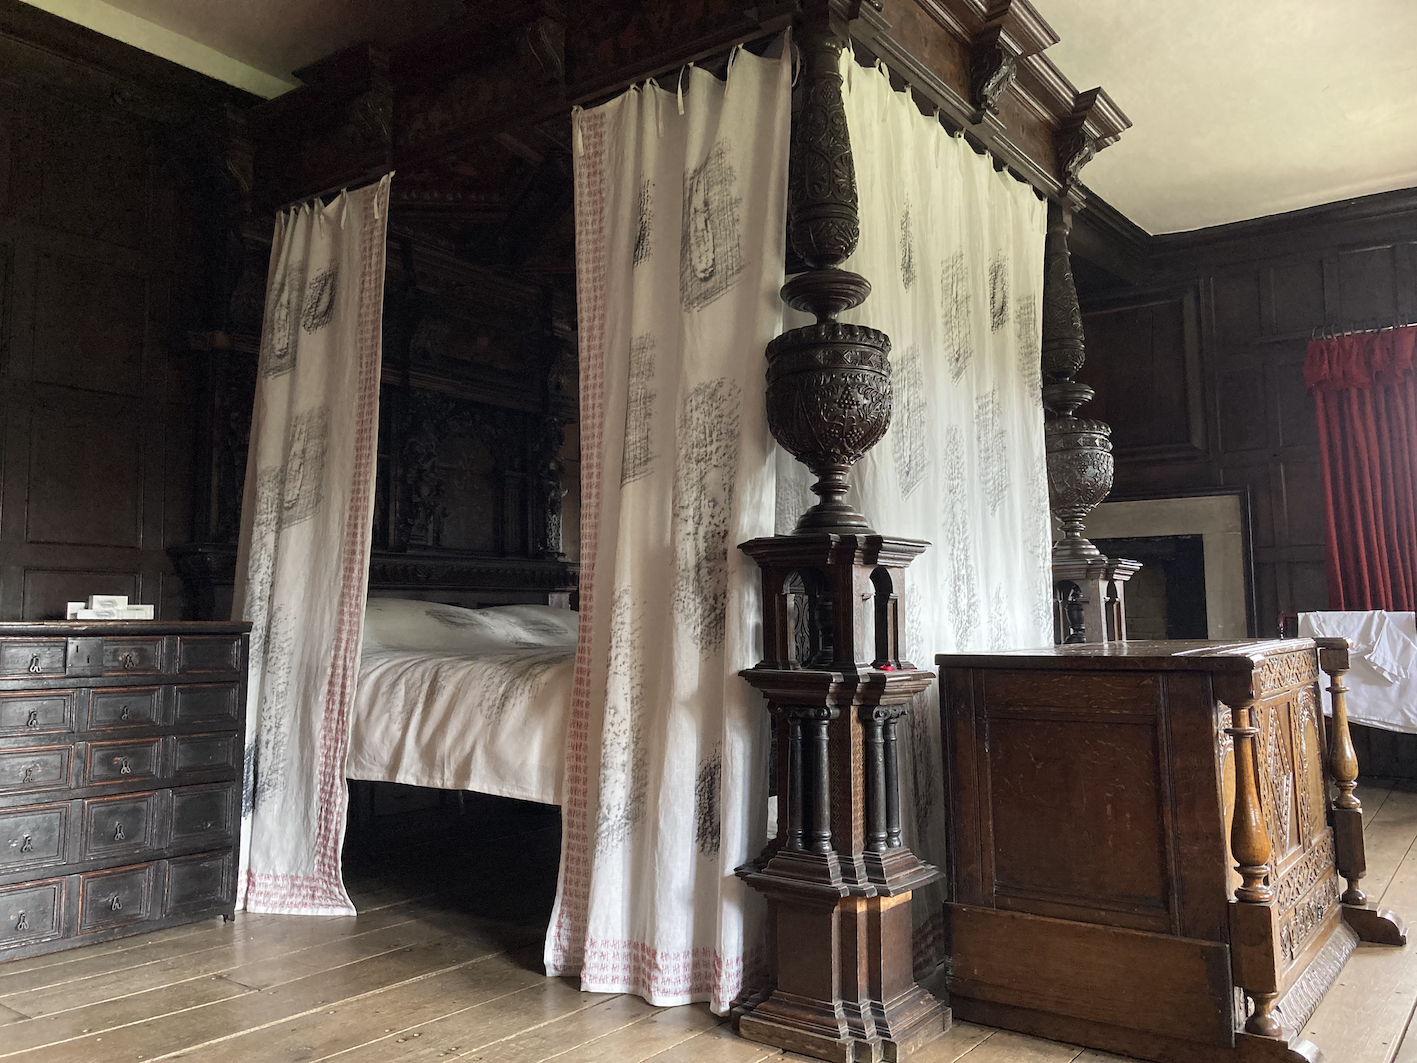 white drapes with a printed pattern hang around an old dark canopy bed in a historic room